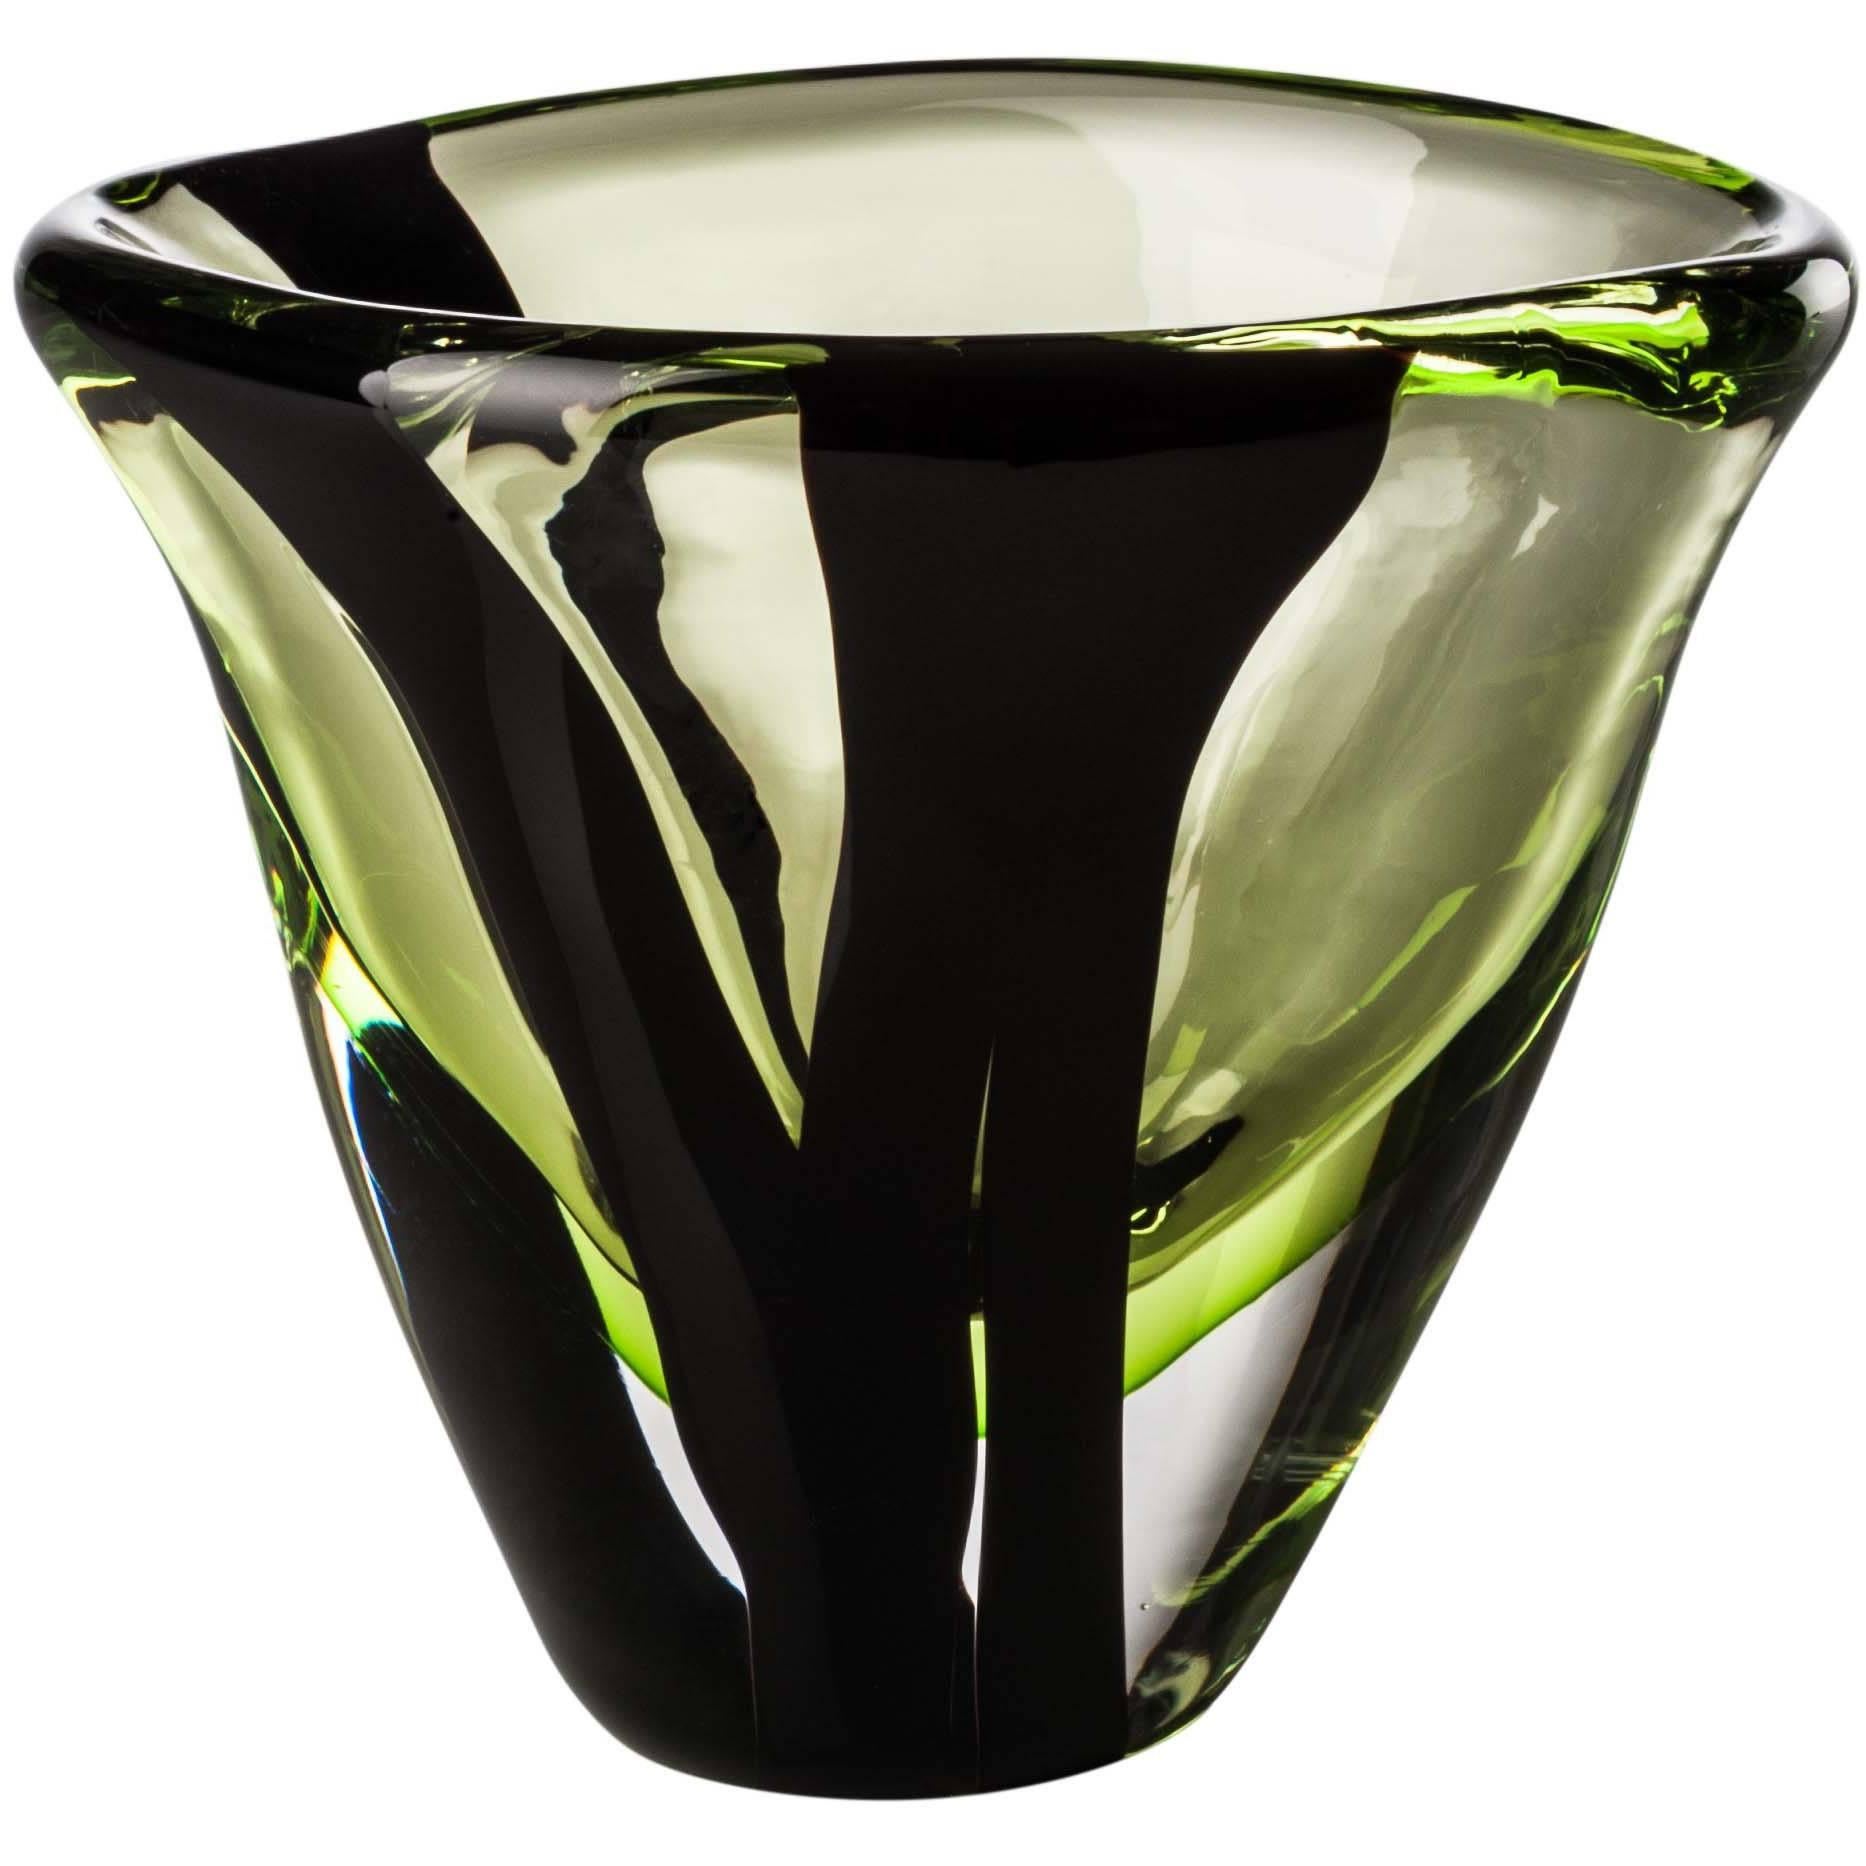 Extra-Small Ovale vase from the Black Belt Collection by Peter Marino & Venini For Sale